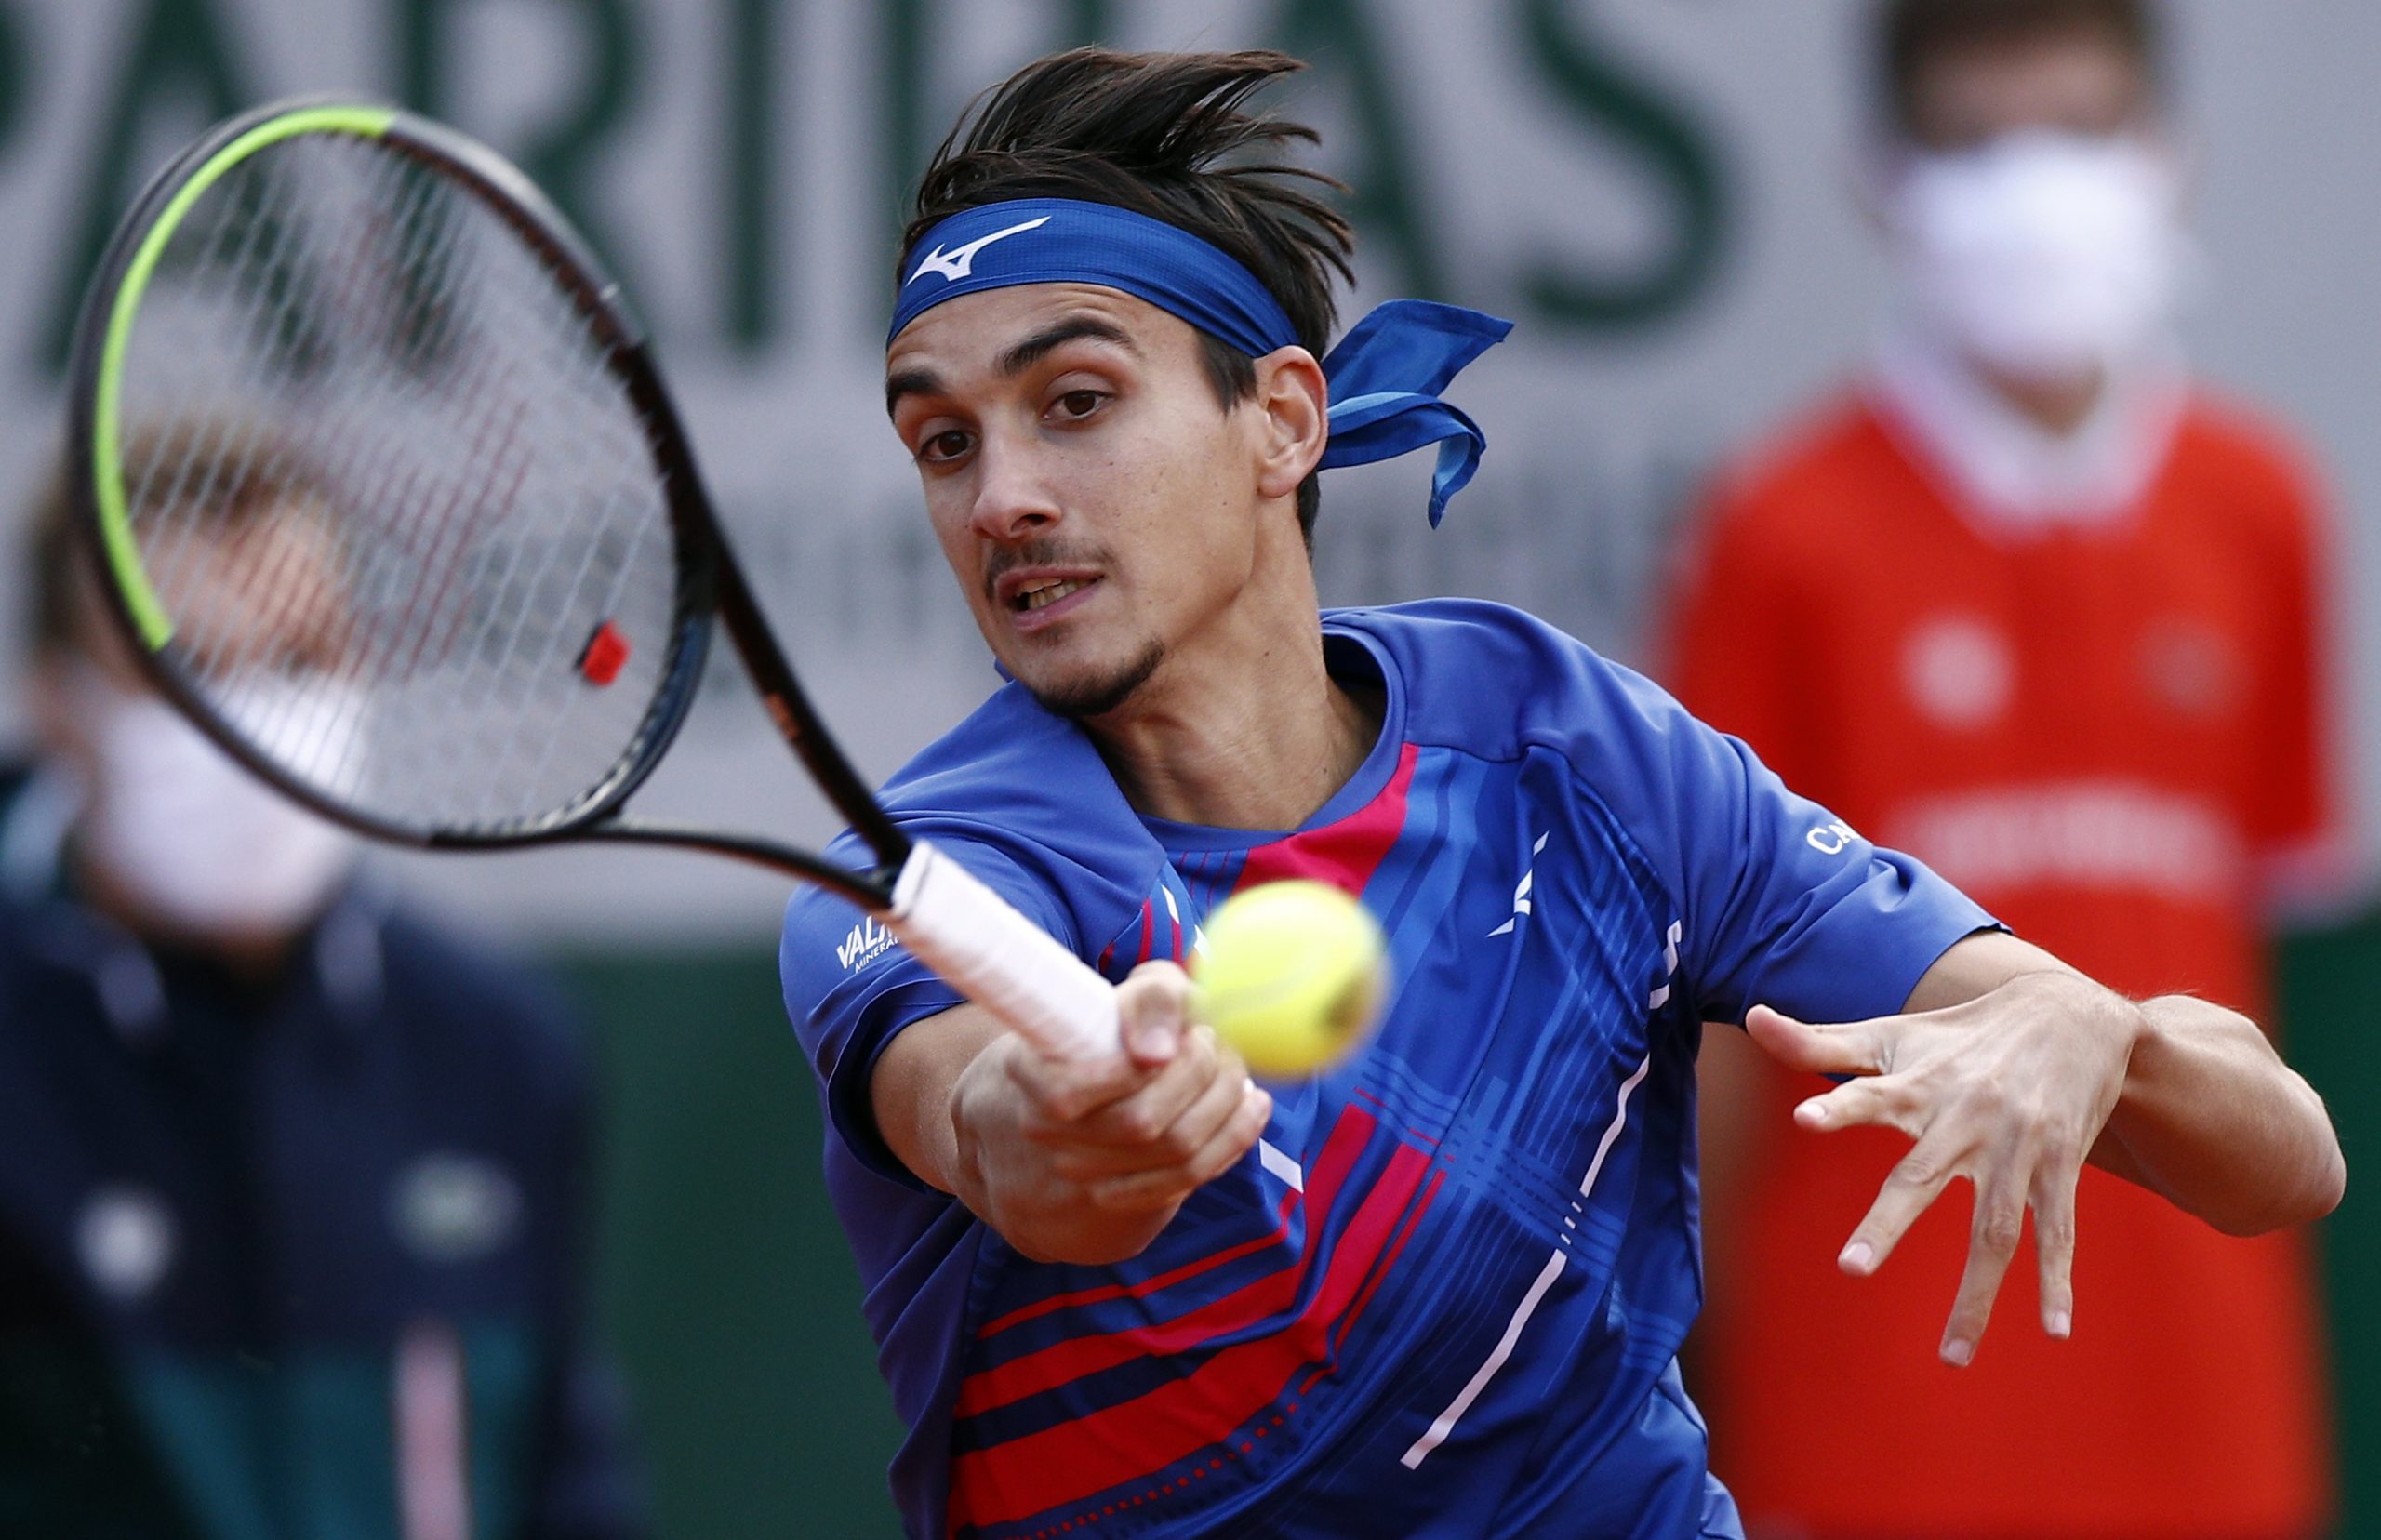 epa08720162 Lorenzo Sonego of Italy in action against Diego Schwartzman of Argentina during their men’s fourth round match during the French Open tennis tournament at Roland ​Garros in Paris, France, 04 October 2020.  EPA/YOAN VALAT